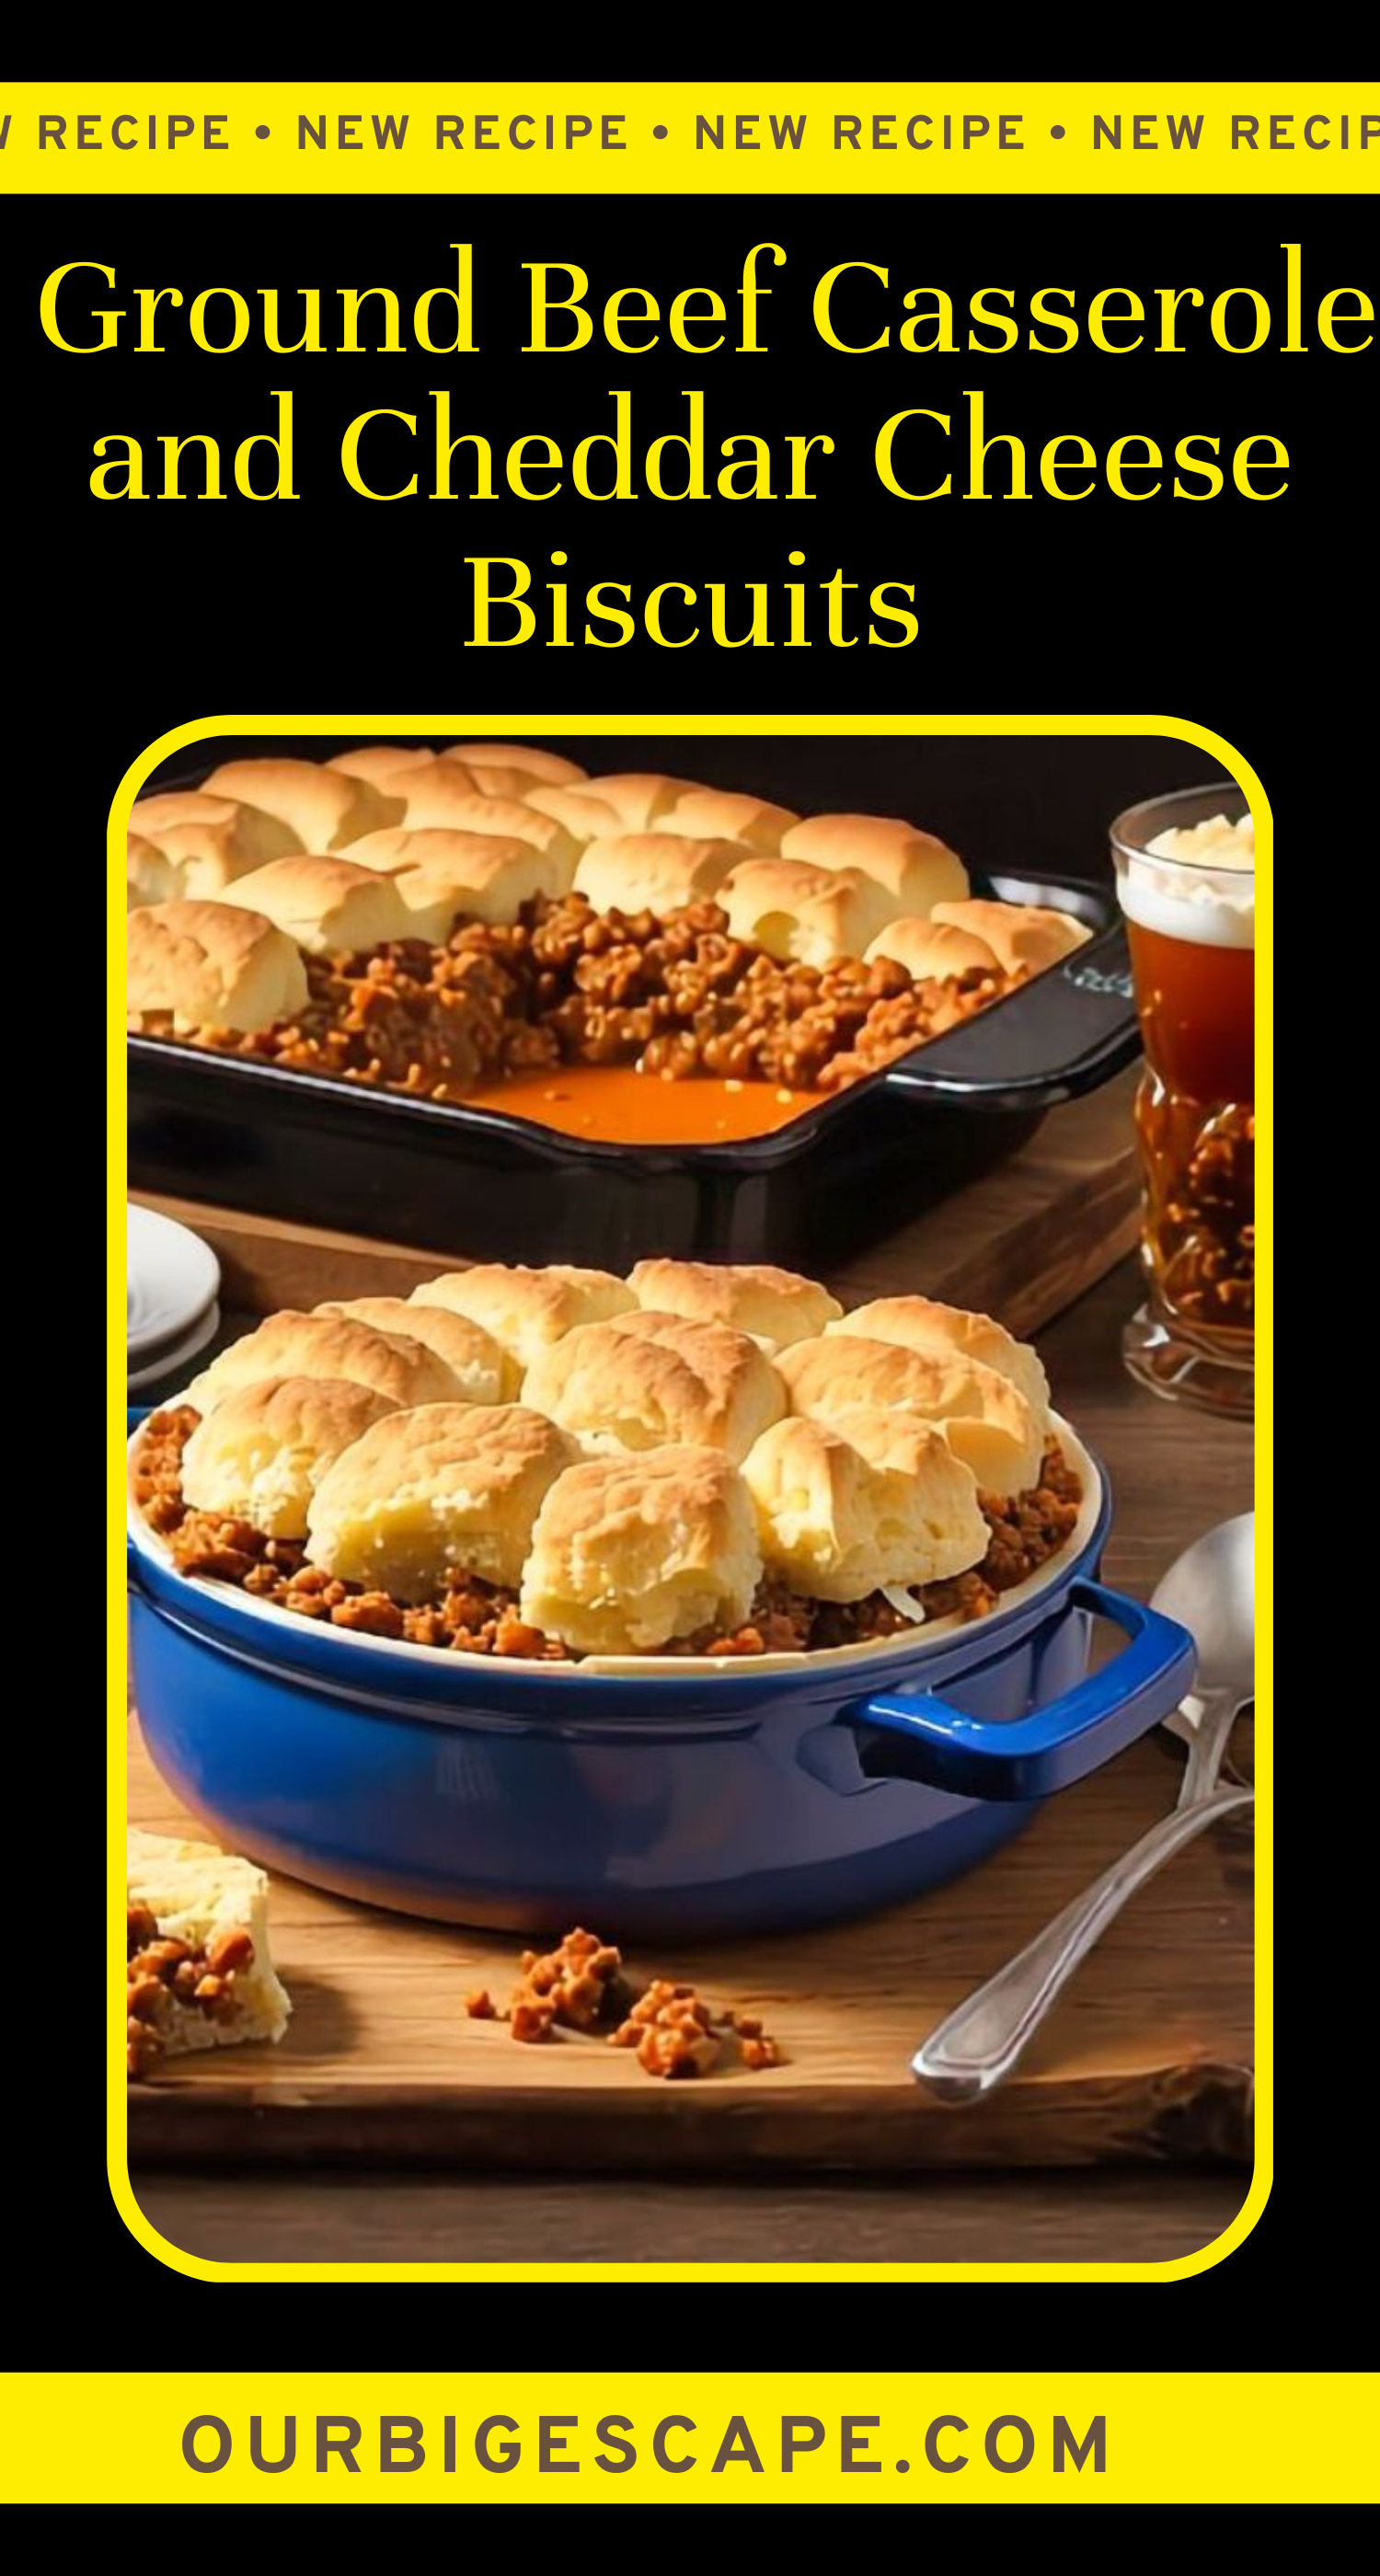 Ground Beef Casserole with Cheddar Cheese Biscuits Recipe